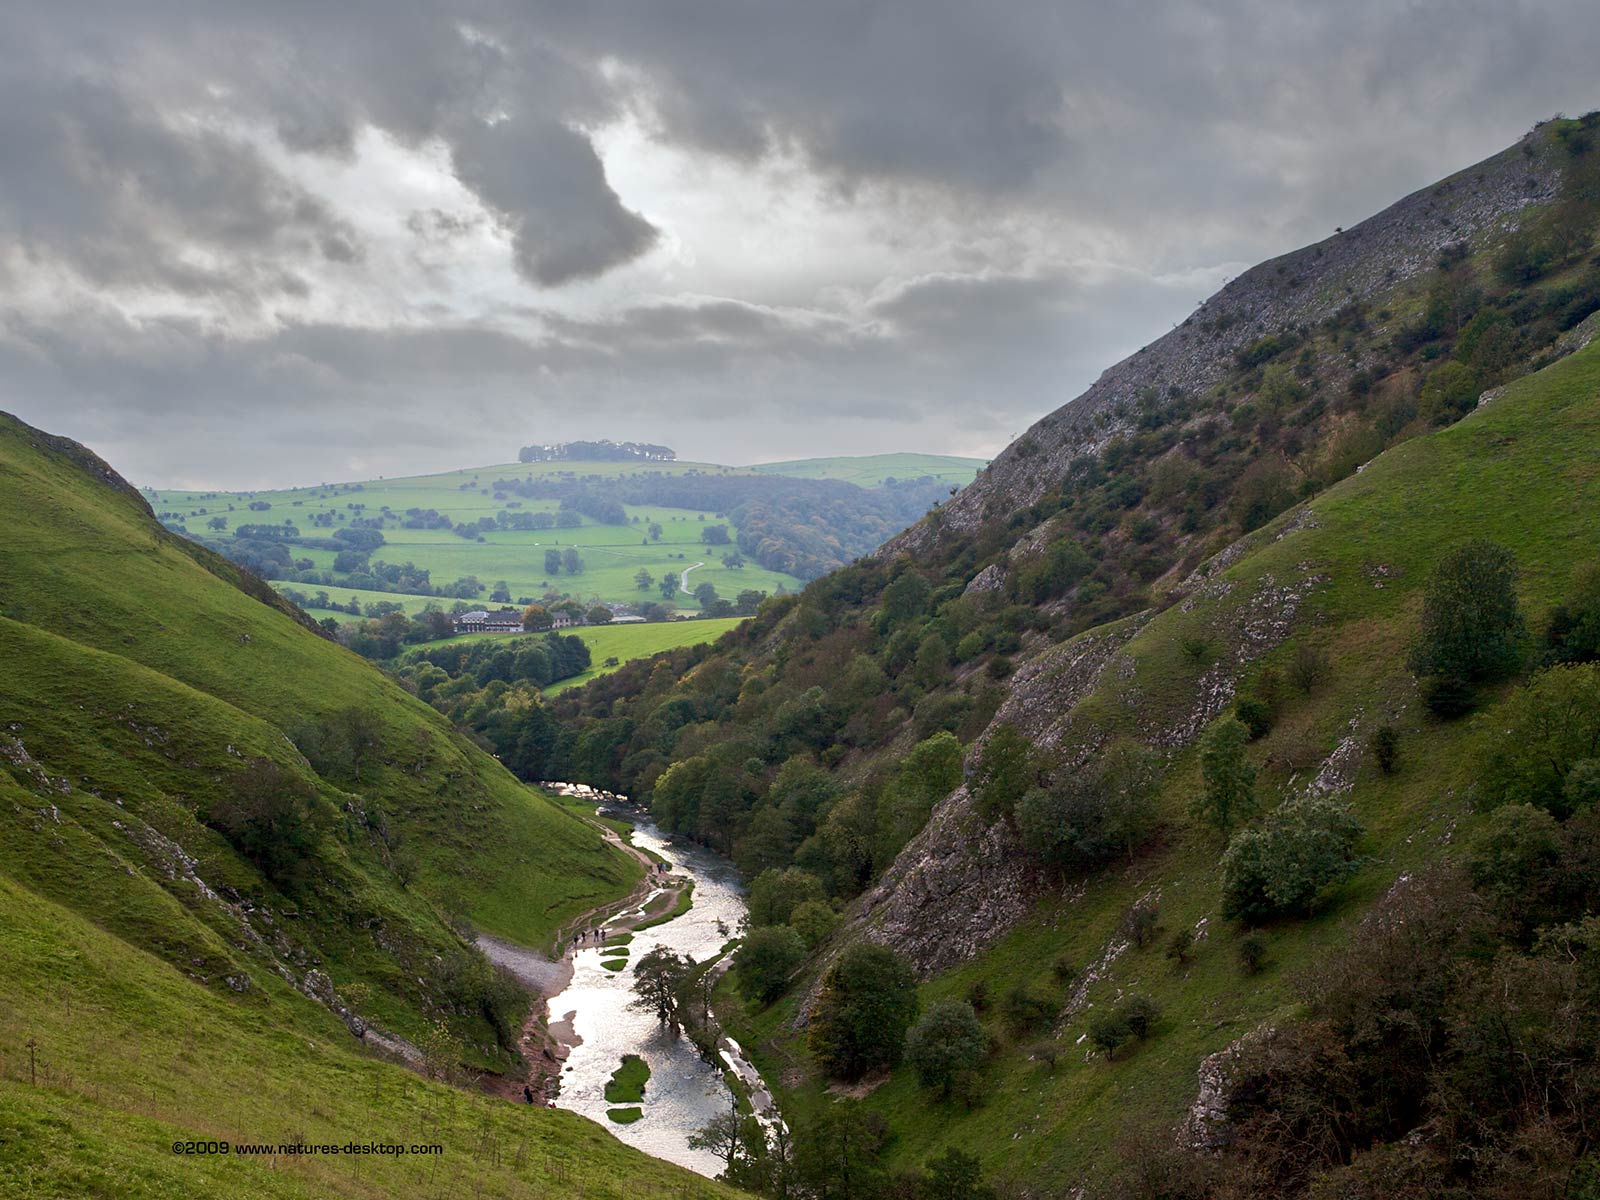 Desktop backgrounds of the hills and River Dove in the Dovedale Valley in Derbyshire